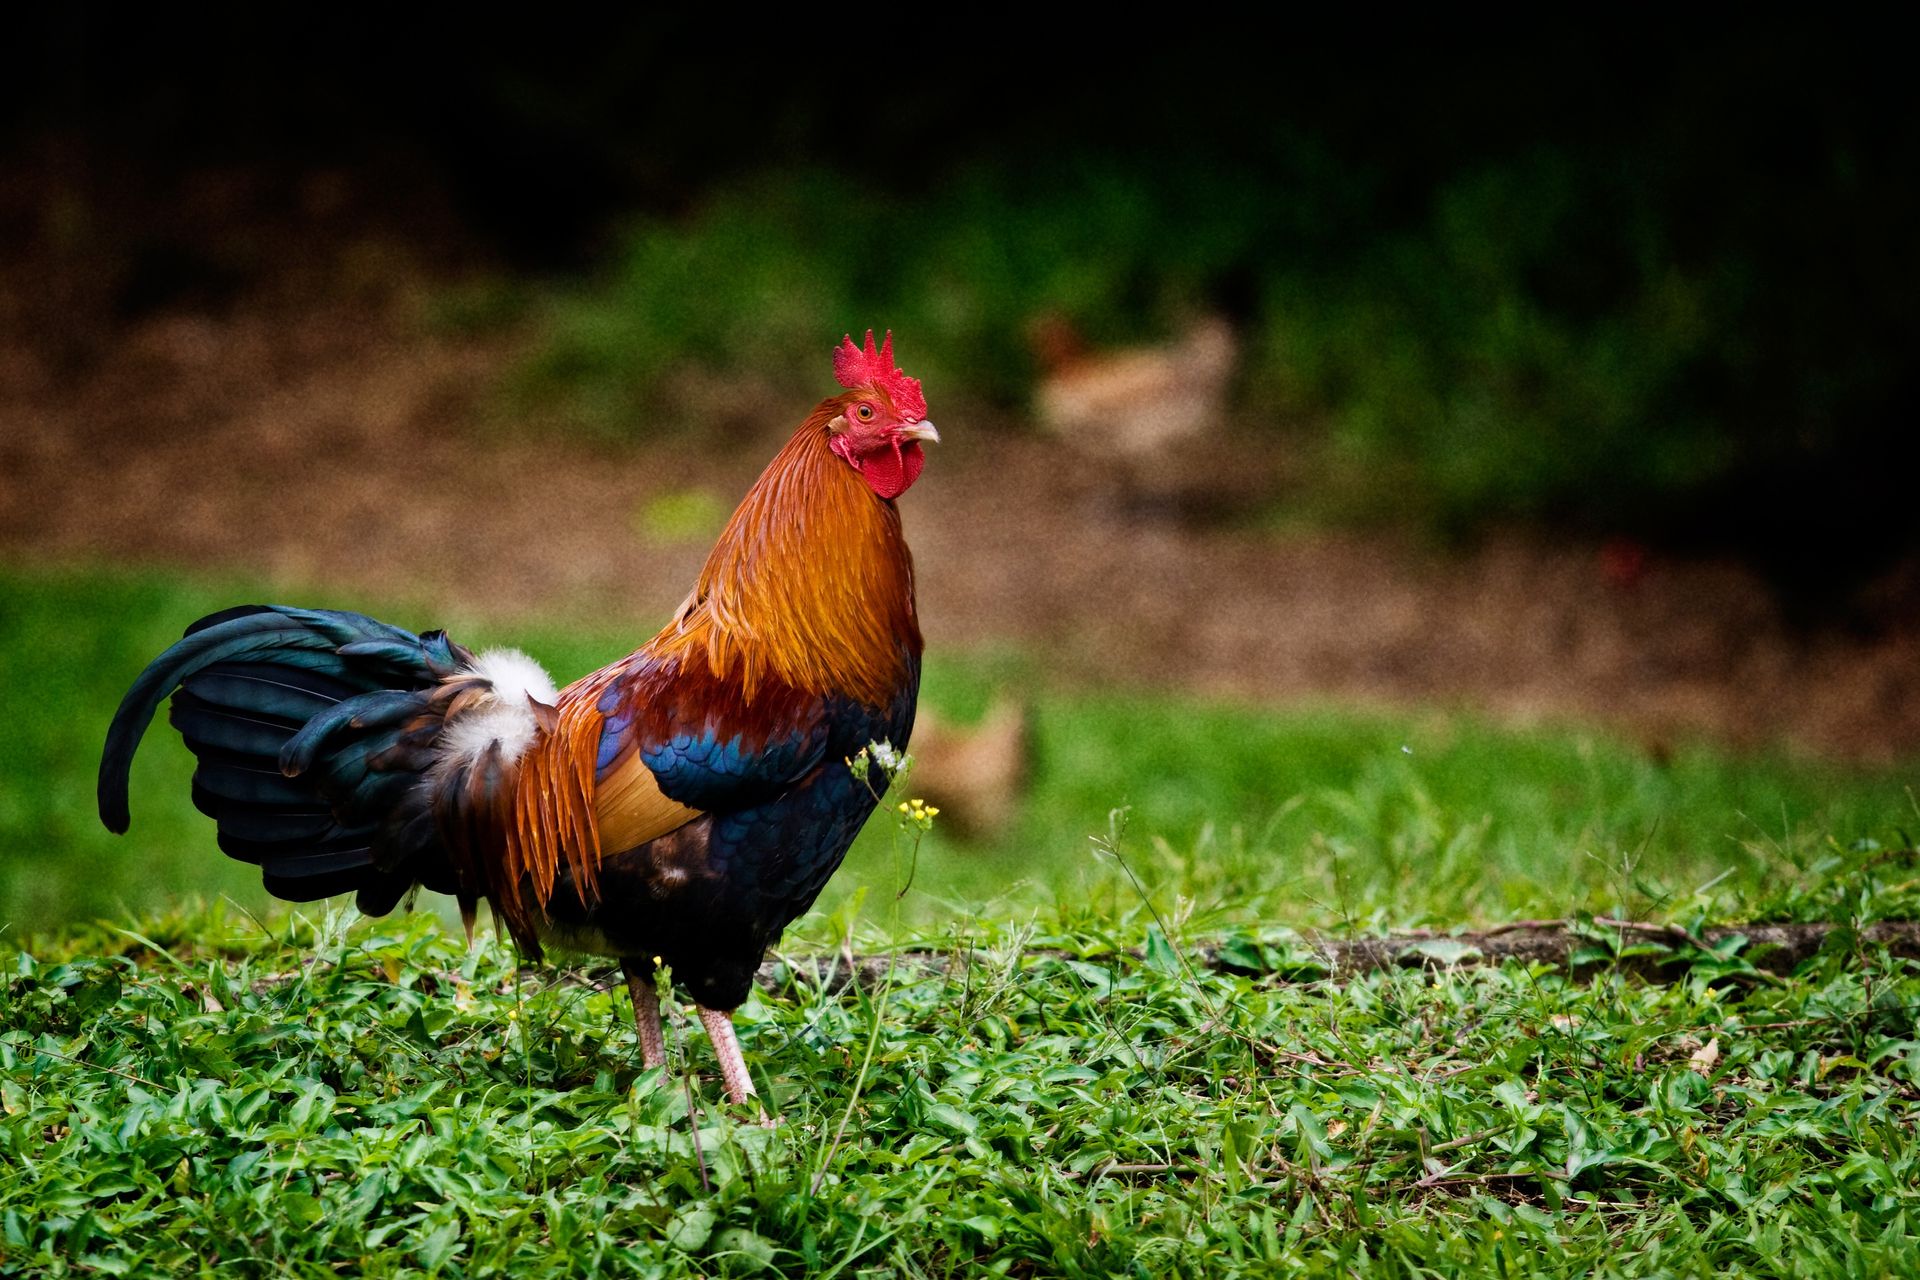 A portrait of rooster on a farm.